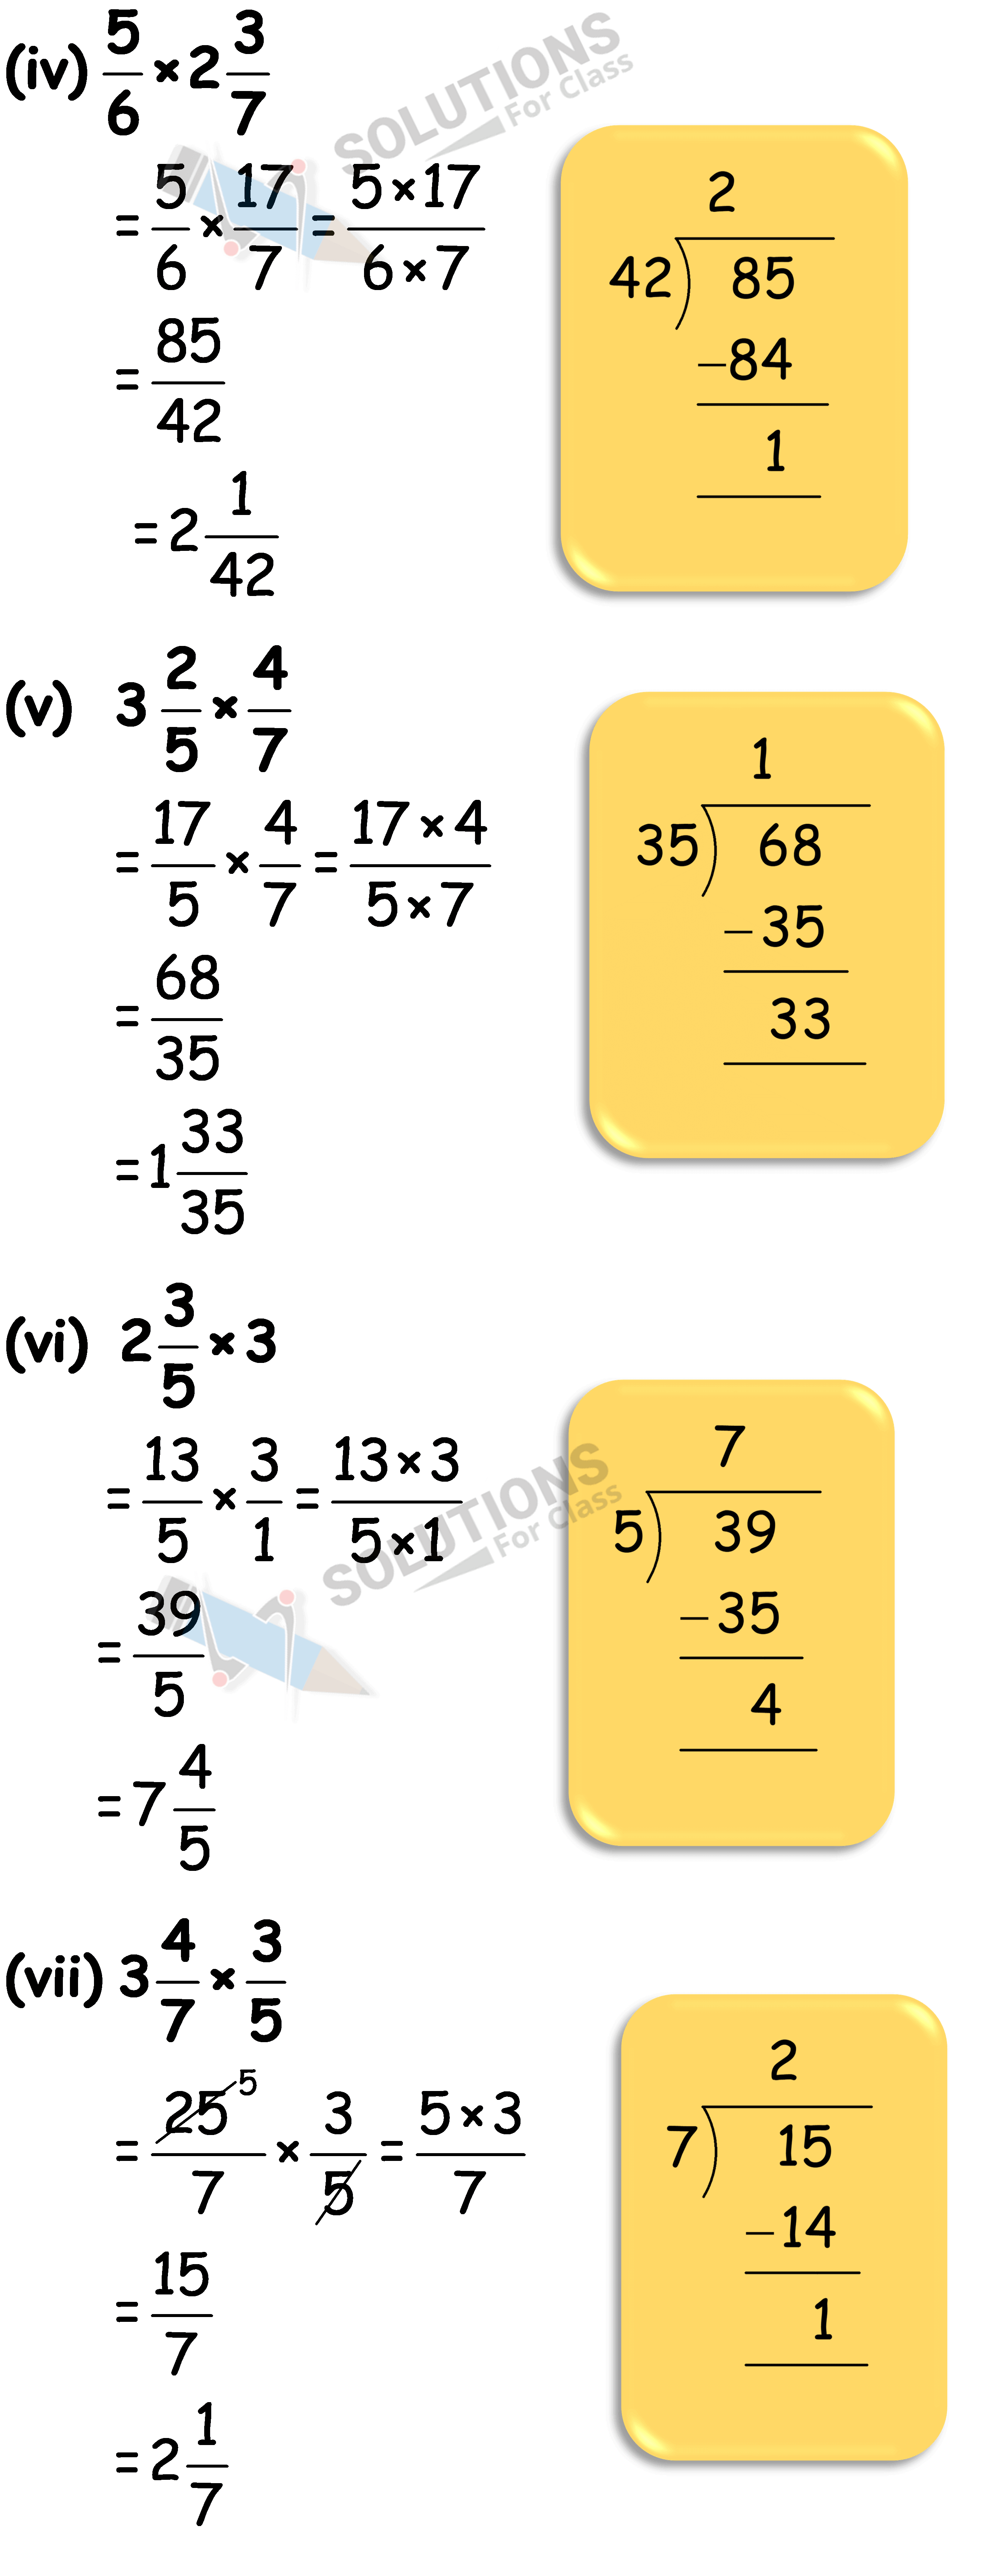 NCERT Solutions For Class 7 Chapter 2, Fractions and Decimals , Exercise 2.3 Q.3 (i-vii)